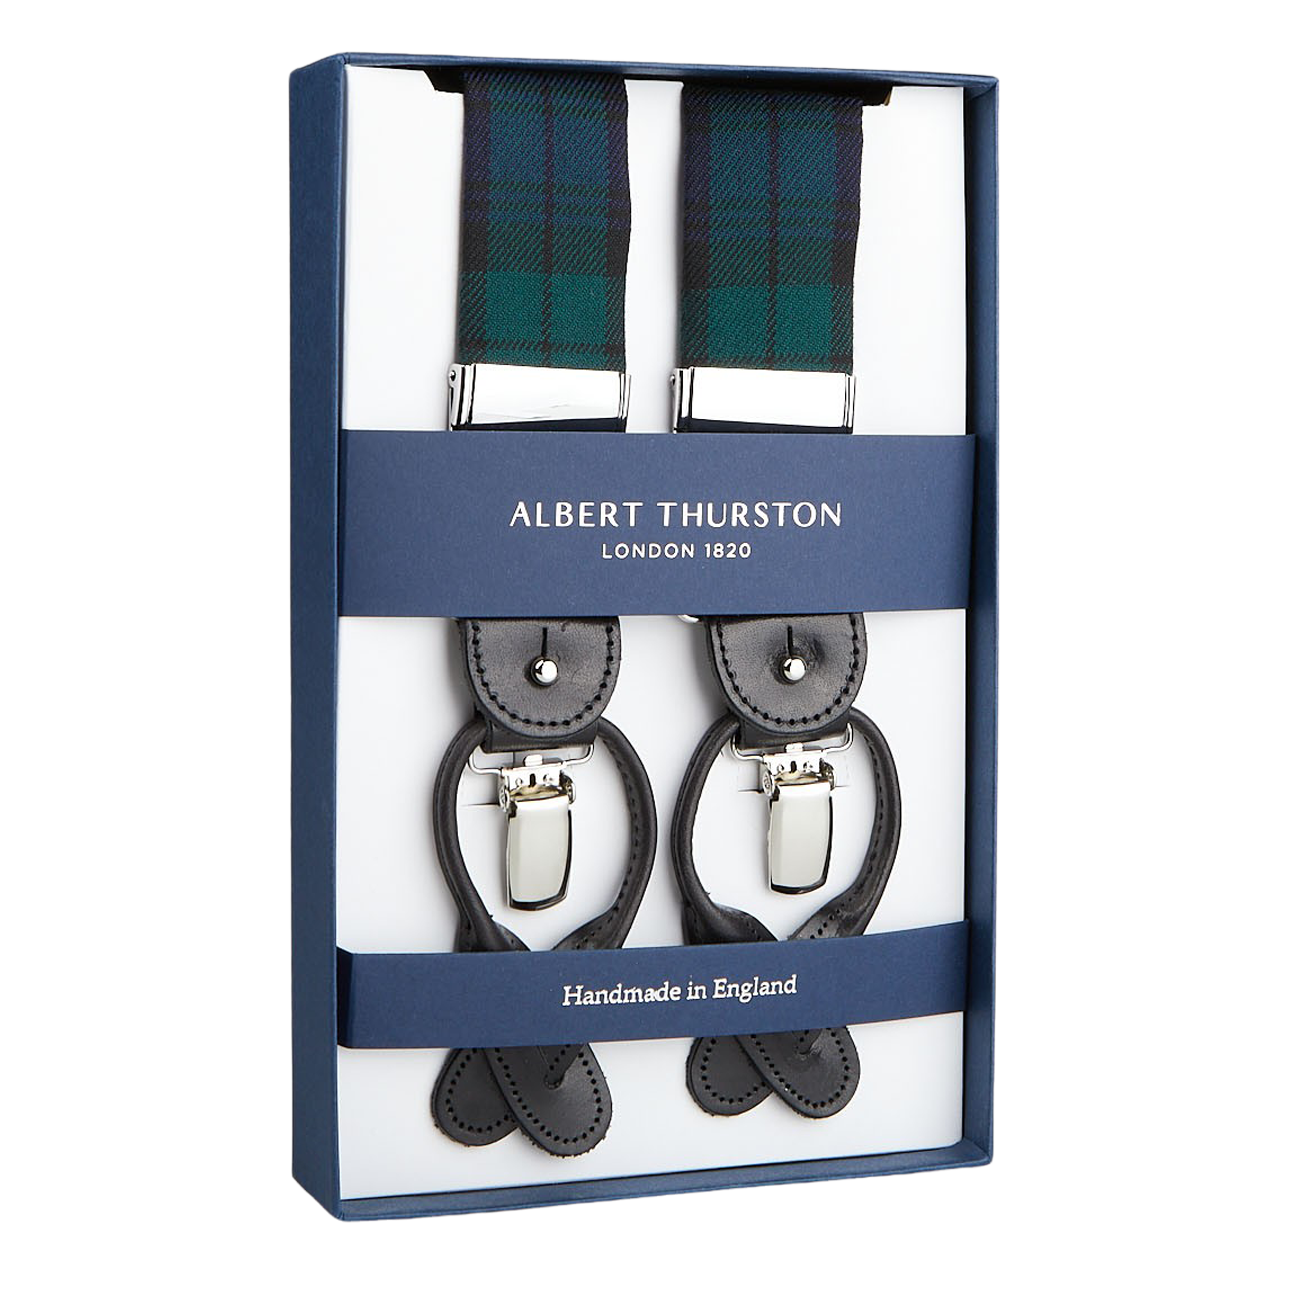 A boxed pair of Albert Thurston Navy Green Wool Black Watch 35 mm braces with leather fittings, advertised as handmade in England.